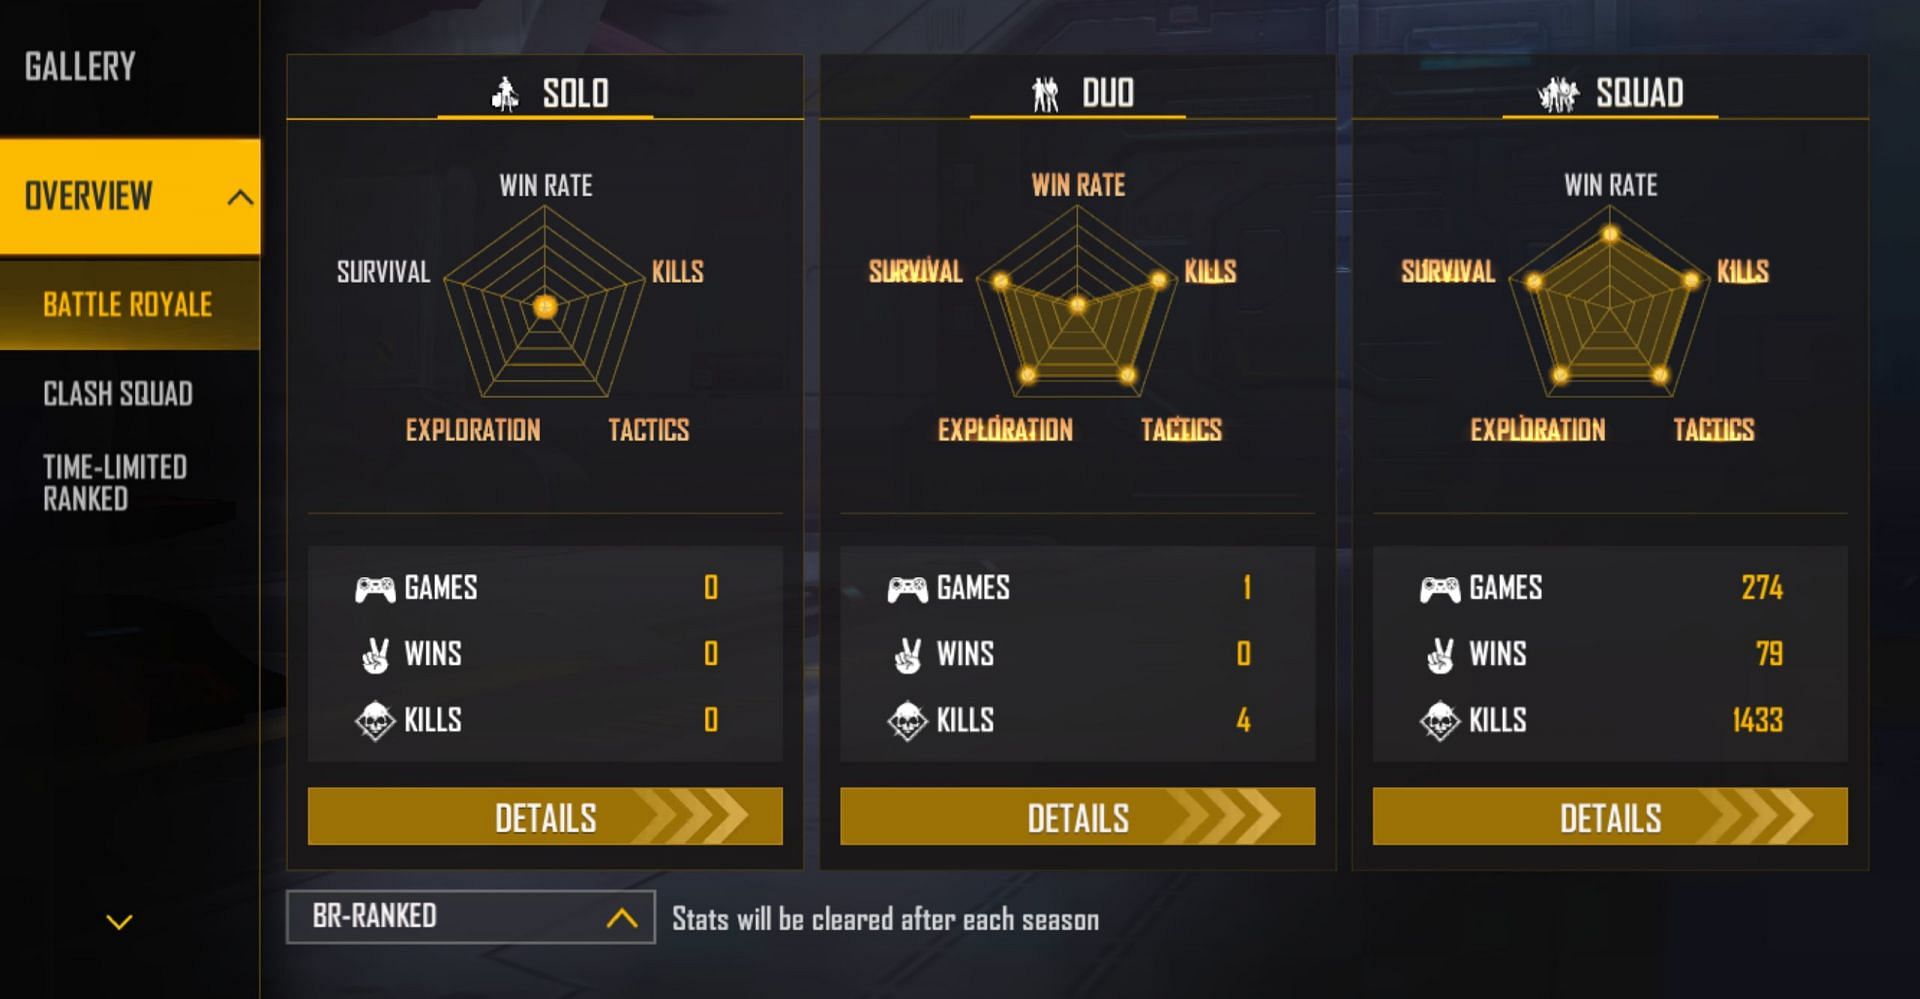 Dev Alone is yet to play solo matches in the current season (Image via Garena)